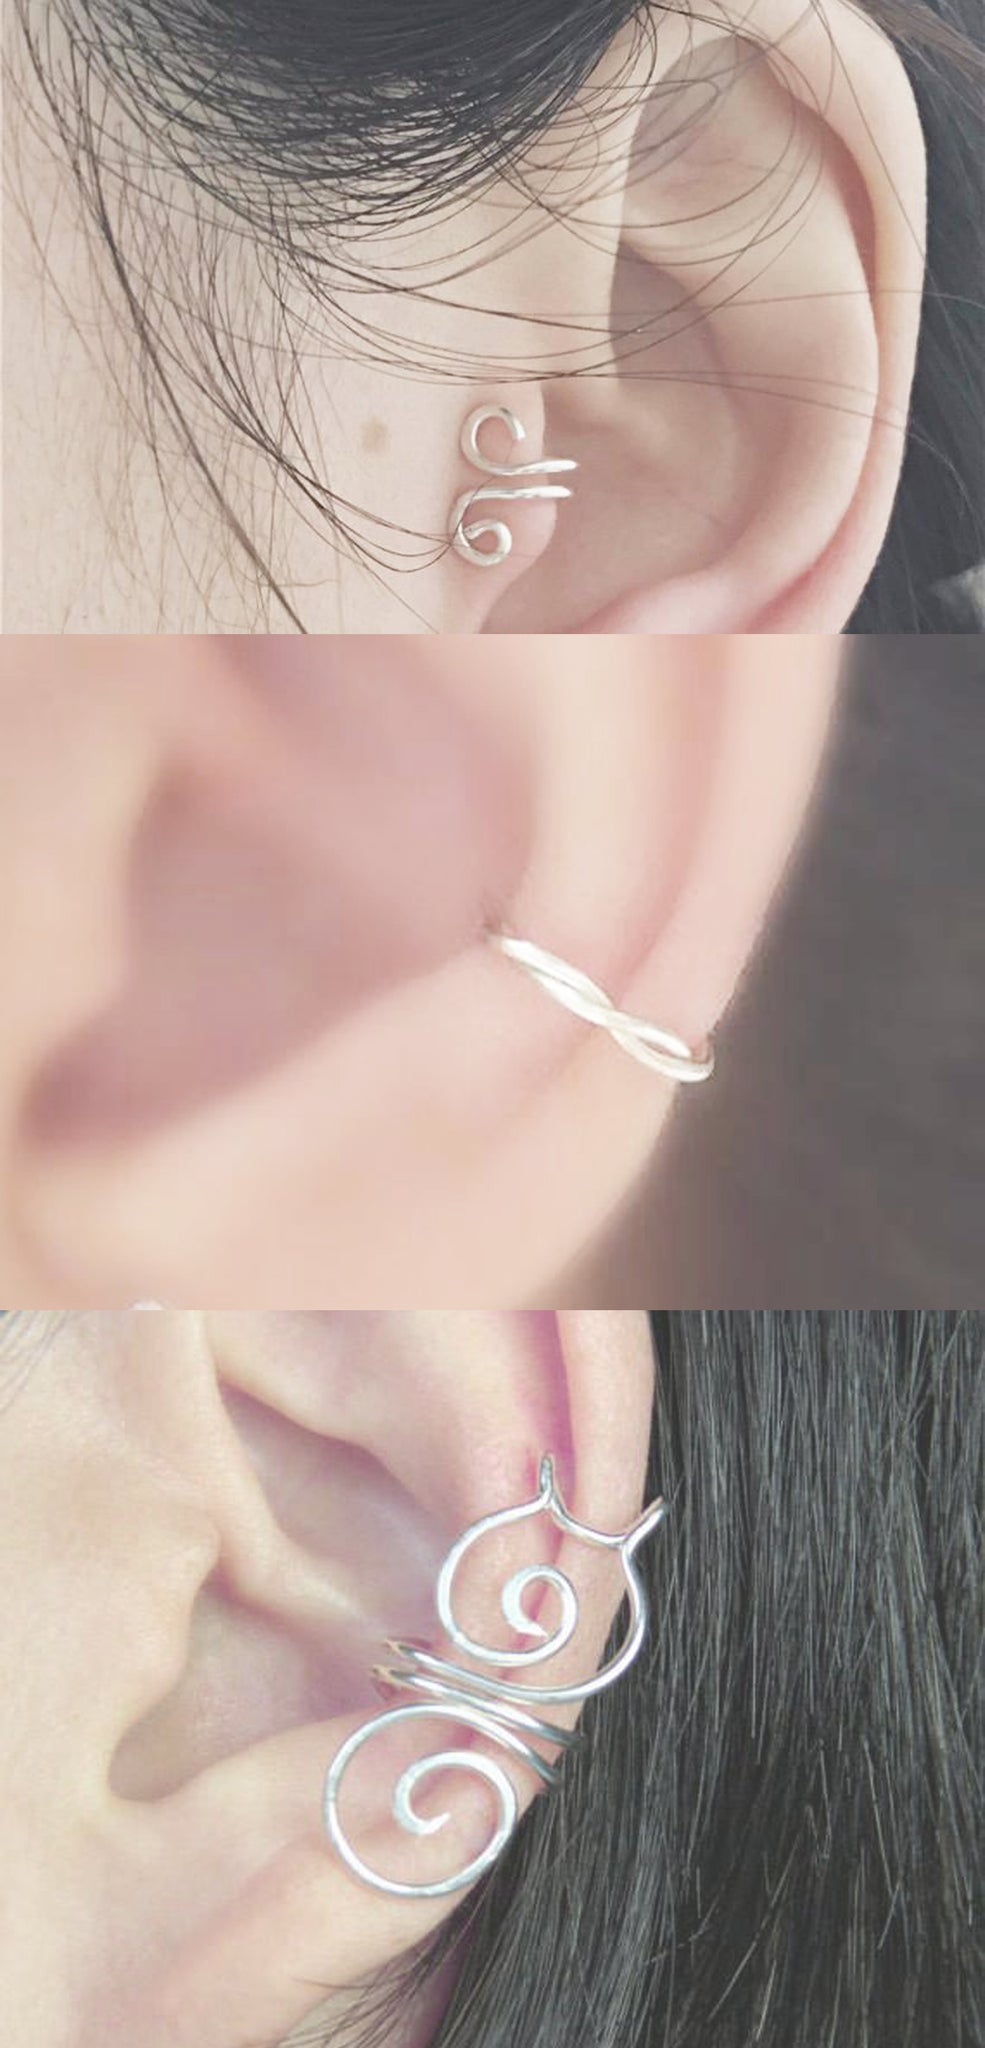 Minimal Simple Single Ear Piercing Ideas at MyBodiArt.com - Wire Wrapped Sterling Silver Earring Cuffs - Tragus Cartilage Conch Helix  